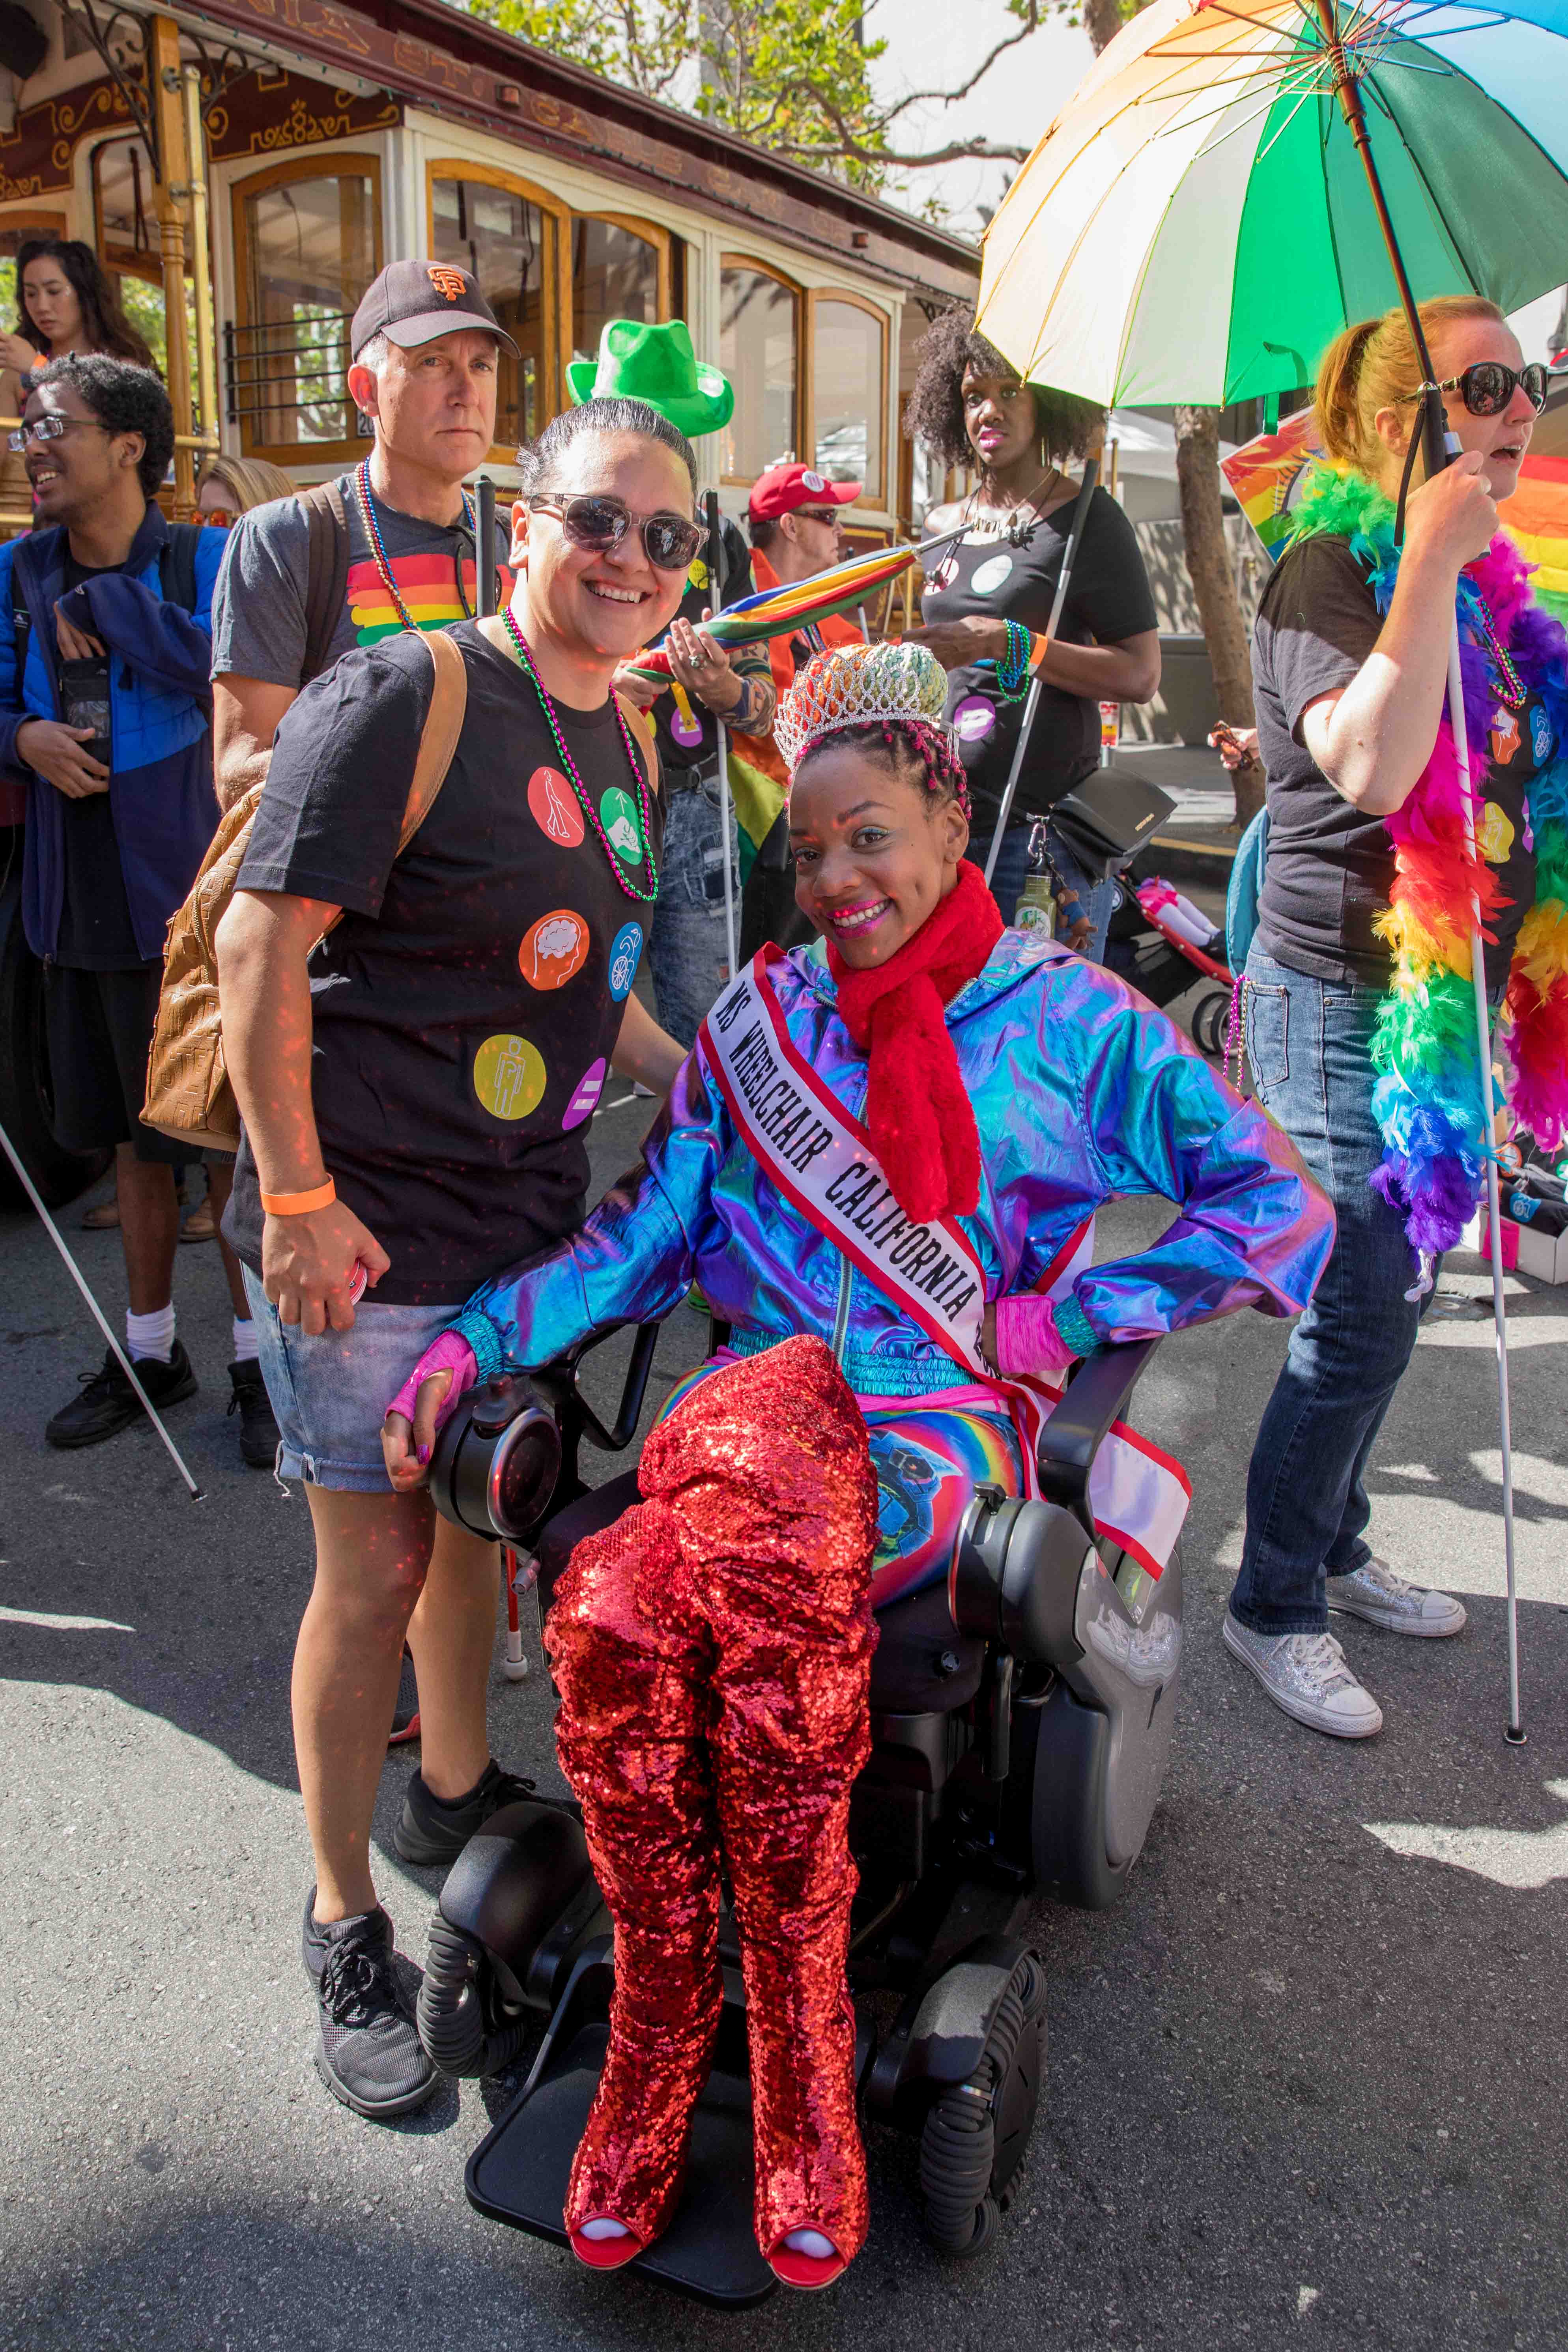 Two pride participants, one standing wearing the LightHouse shirt and wearing 'Ms. Wheelchair California' sash, prepare to march in the parade.